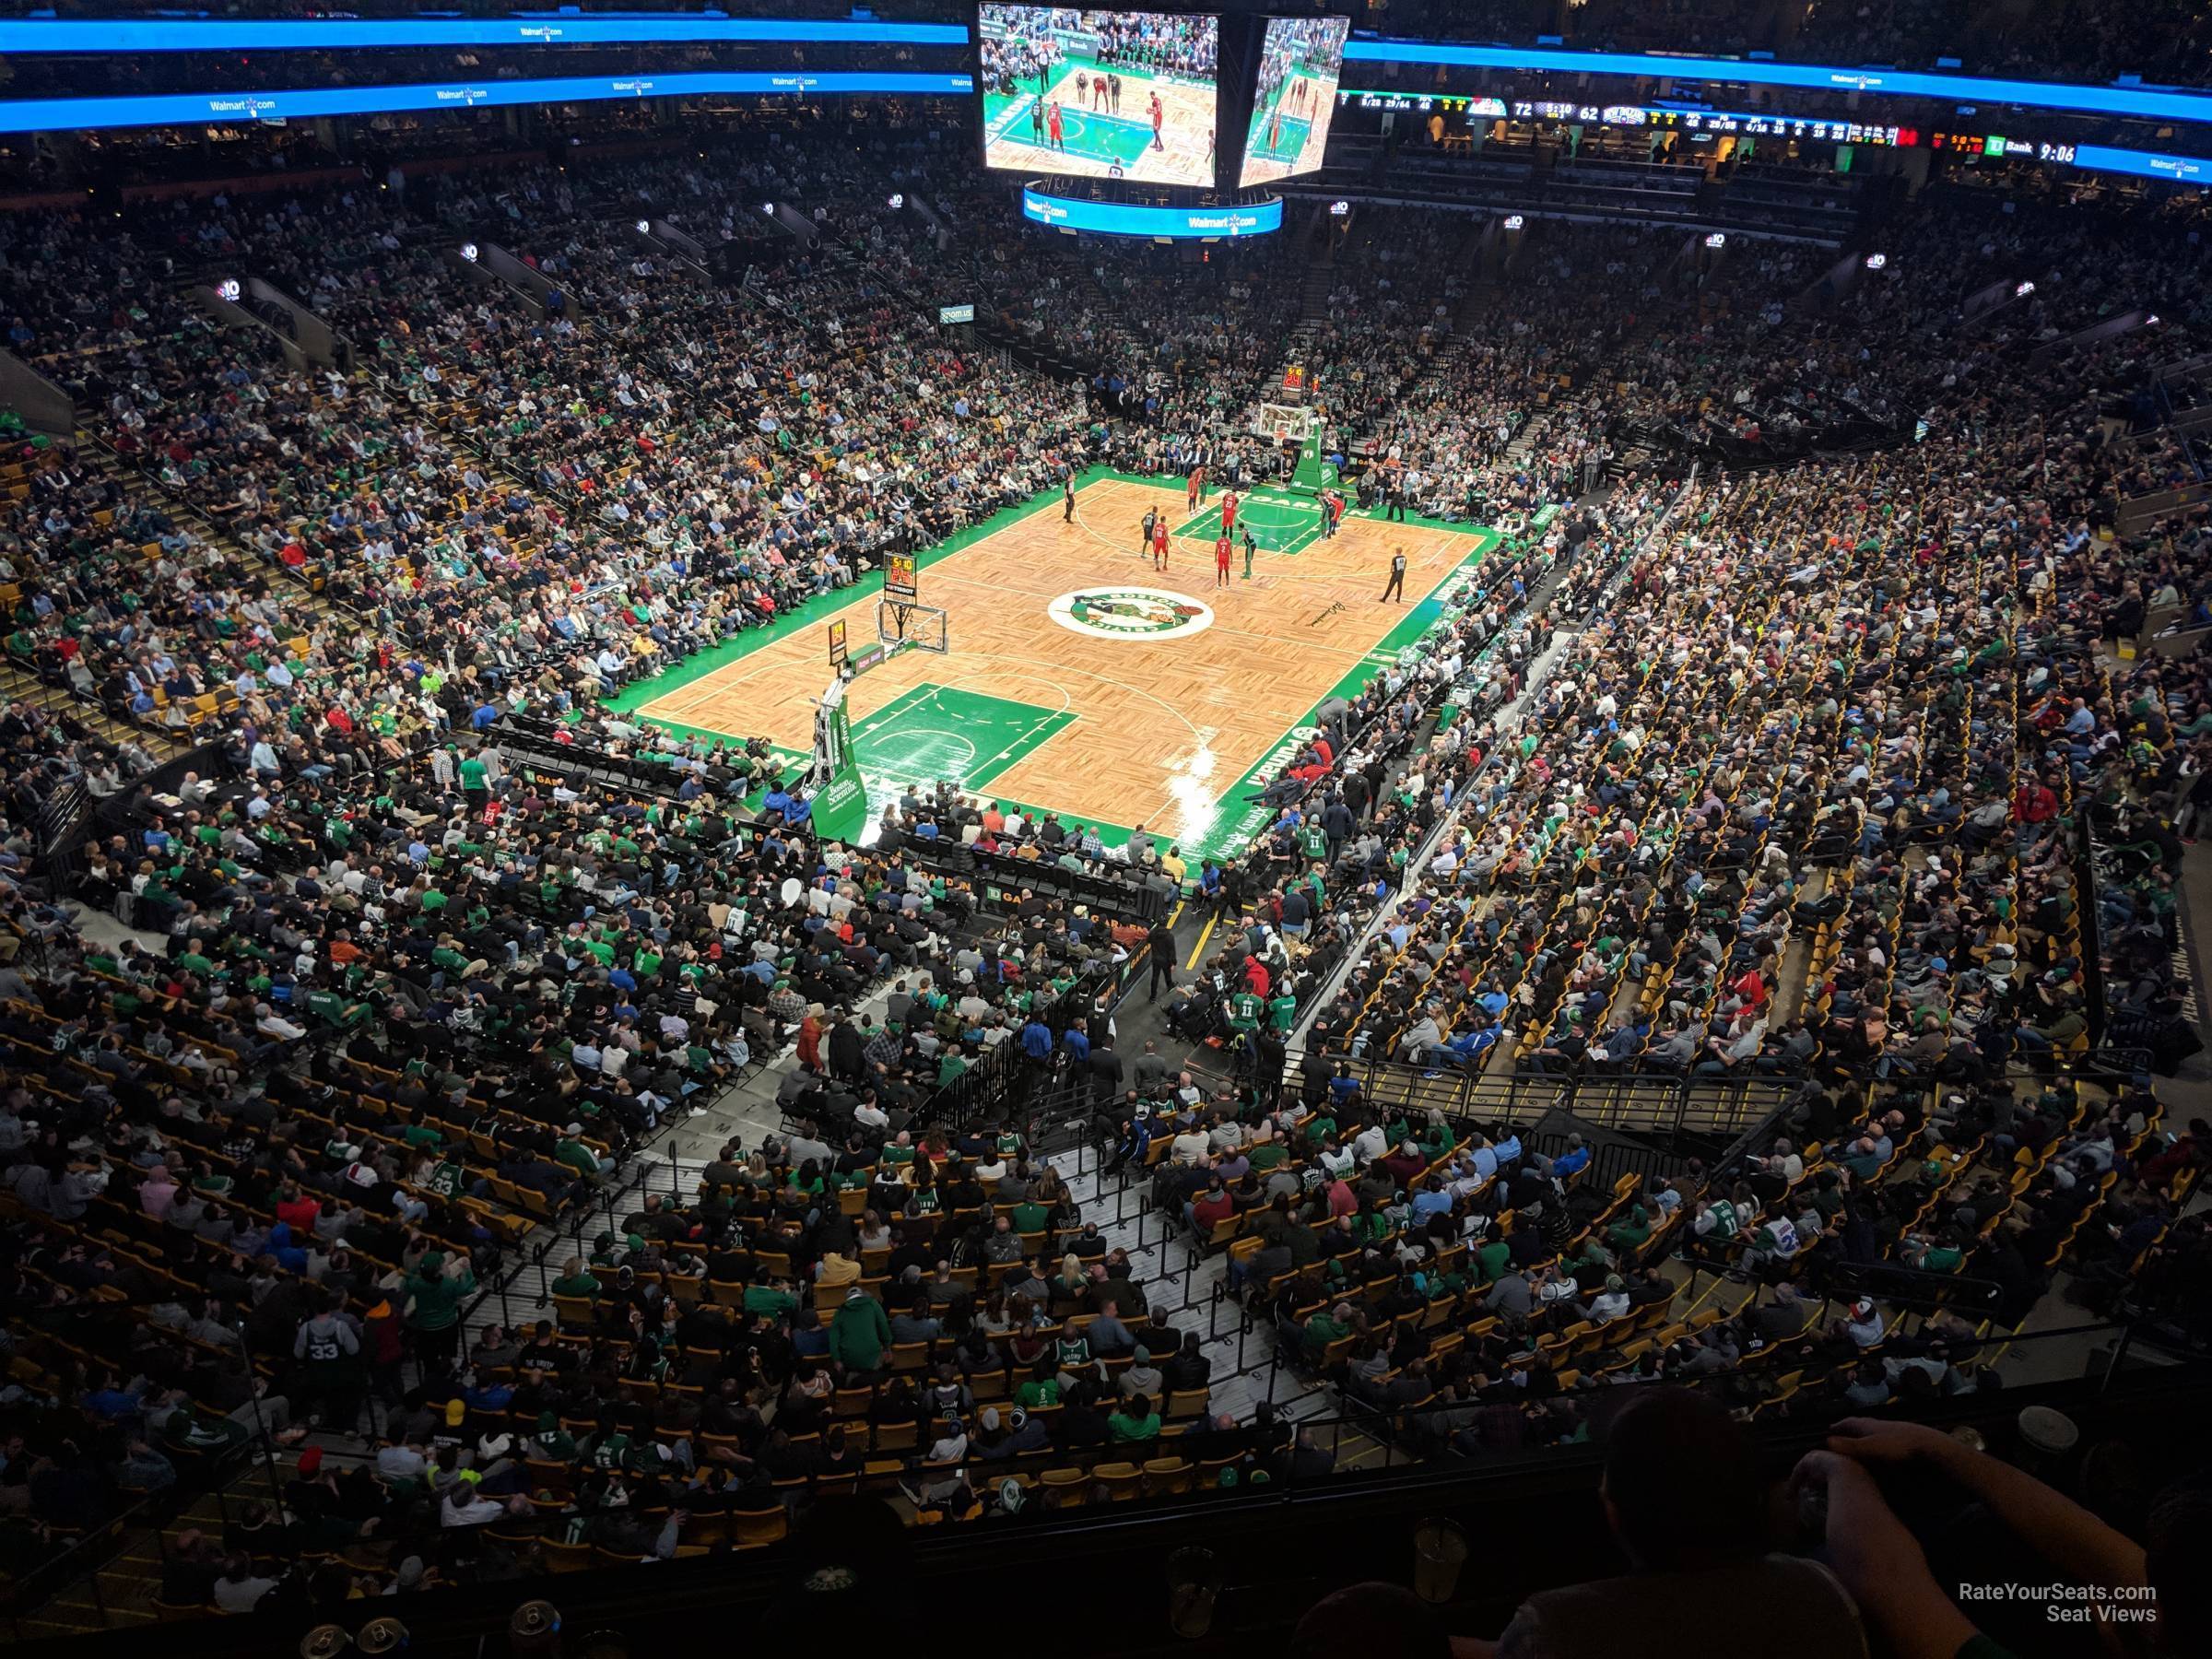 section 306, row 3 seat view  for basketball - td garden